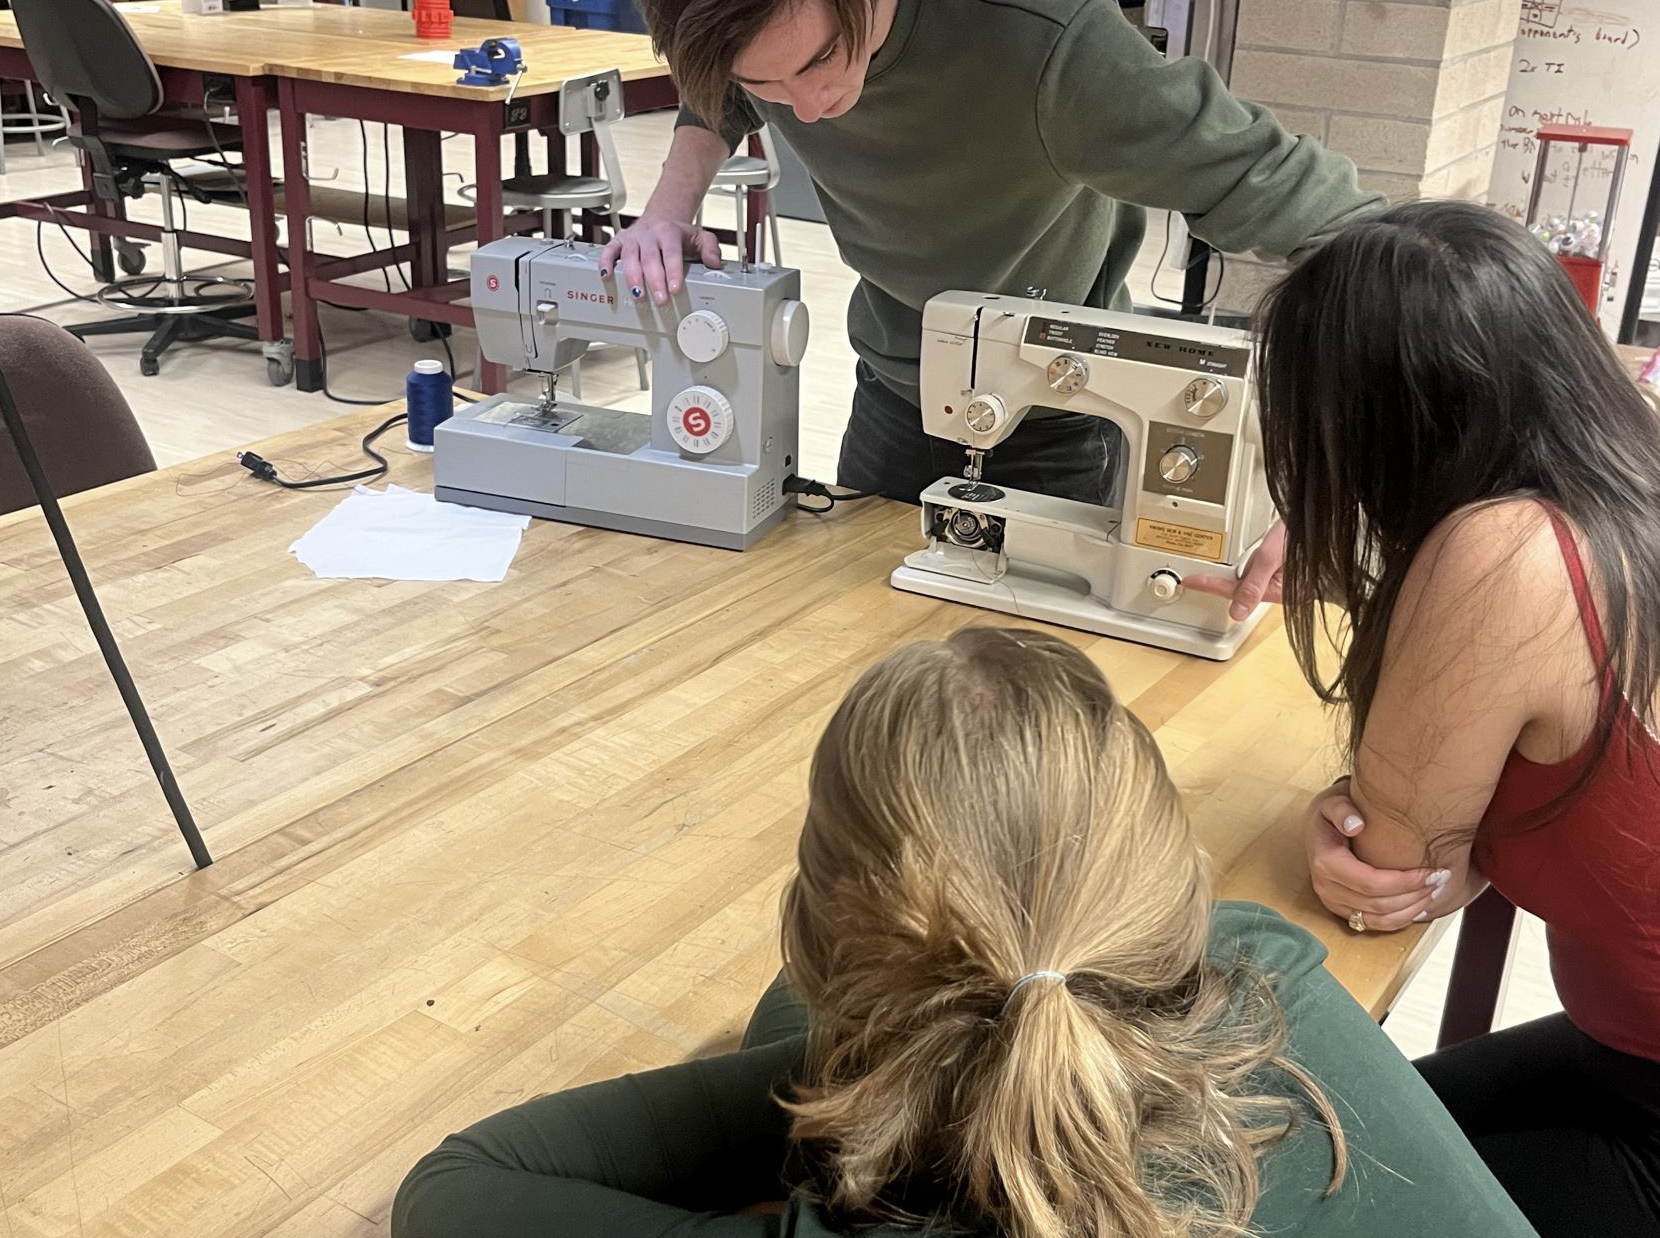 Students in the Innovation Lab gathering around the sewing machine